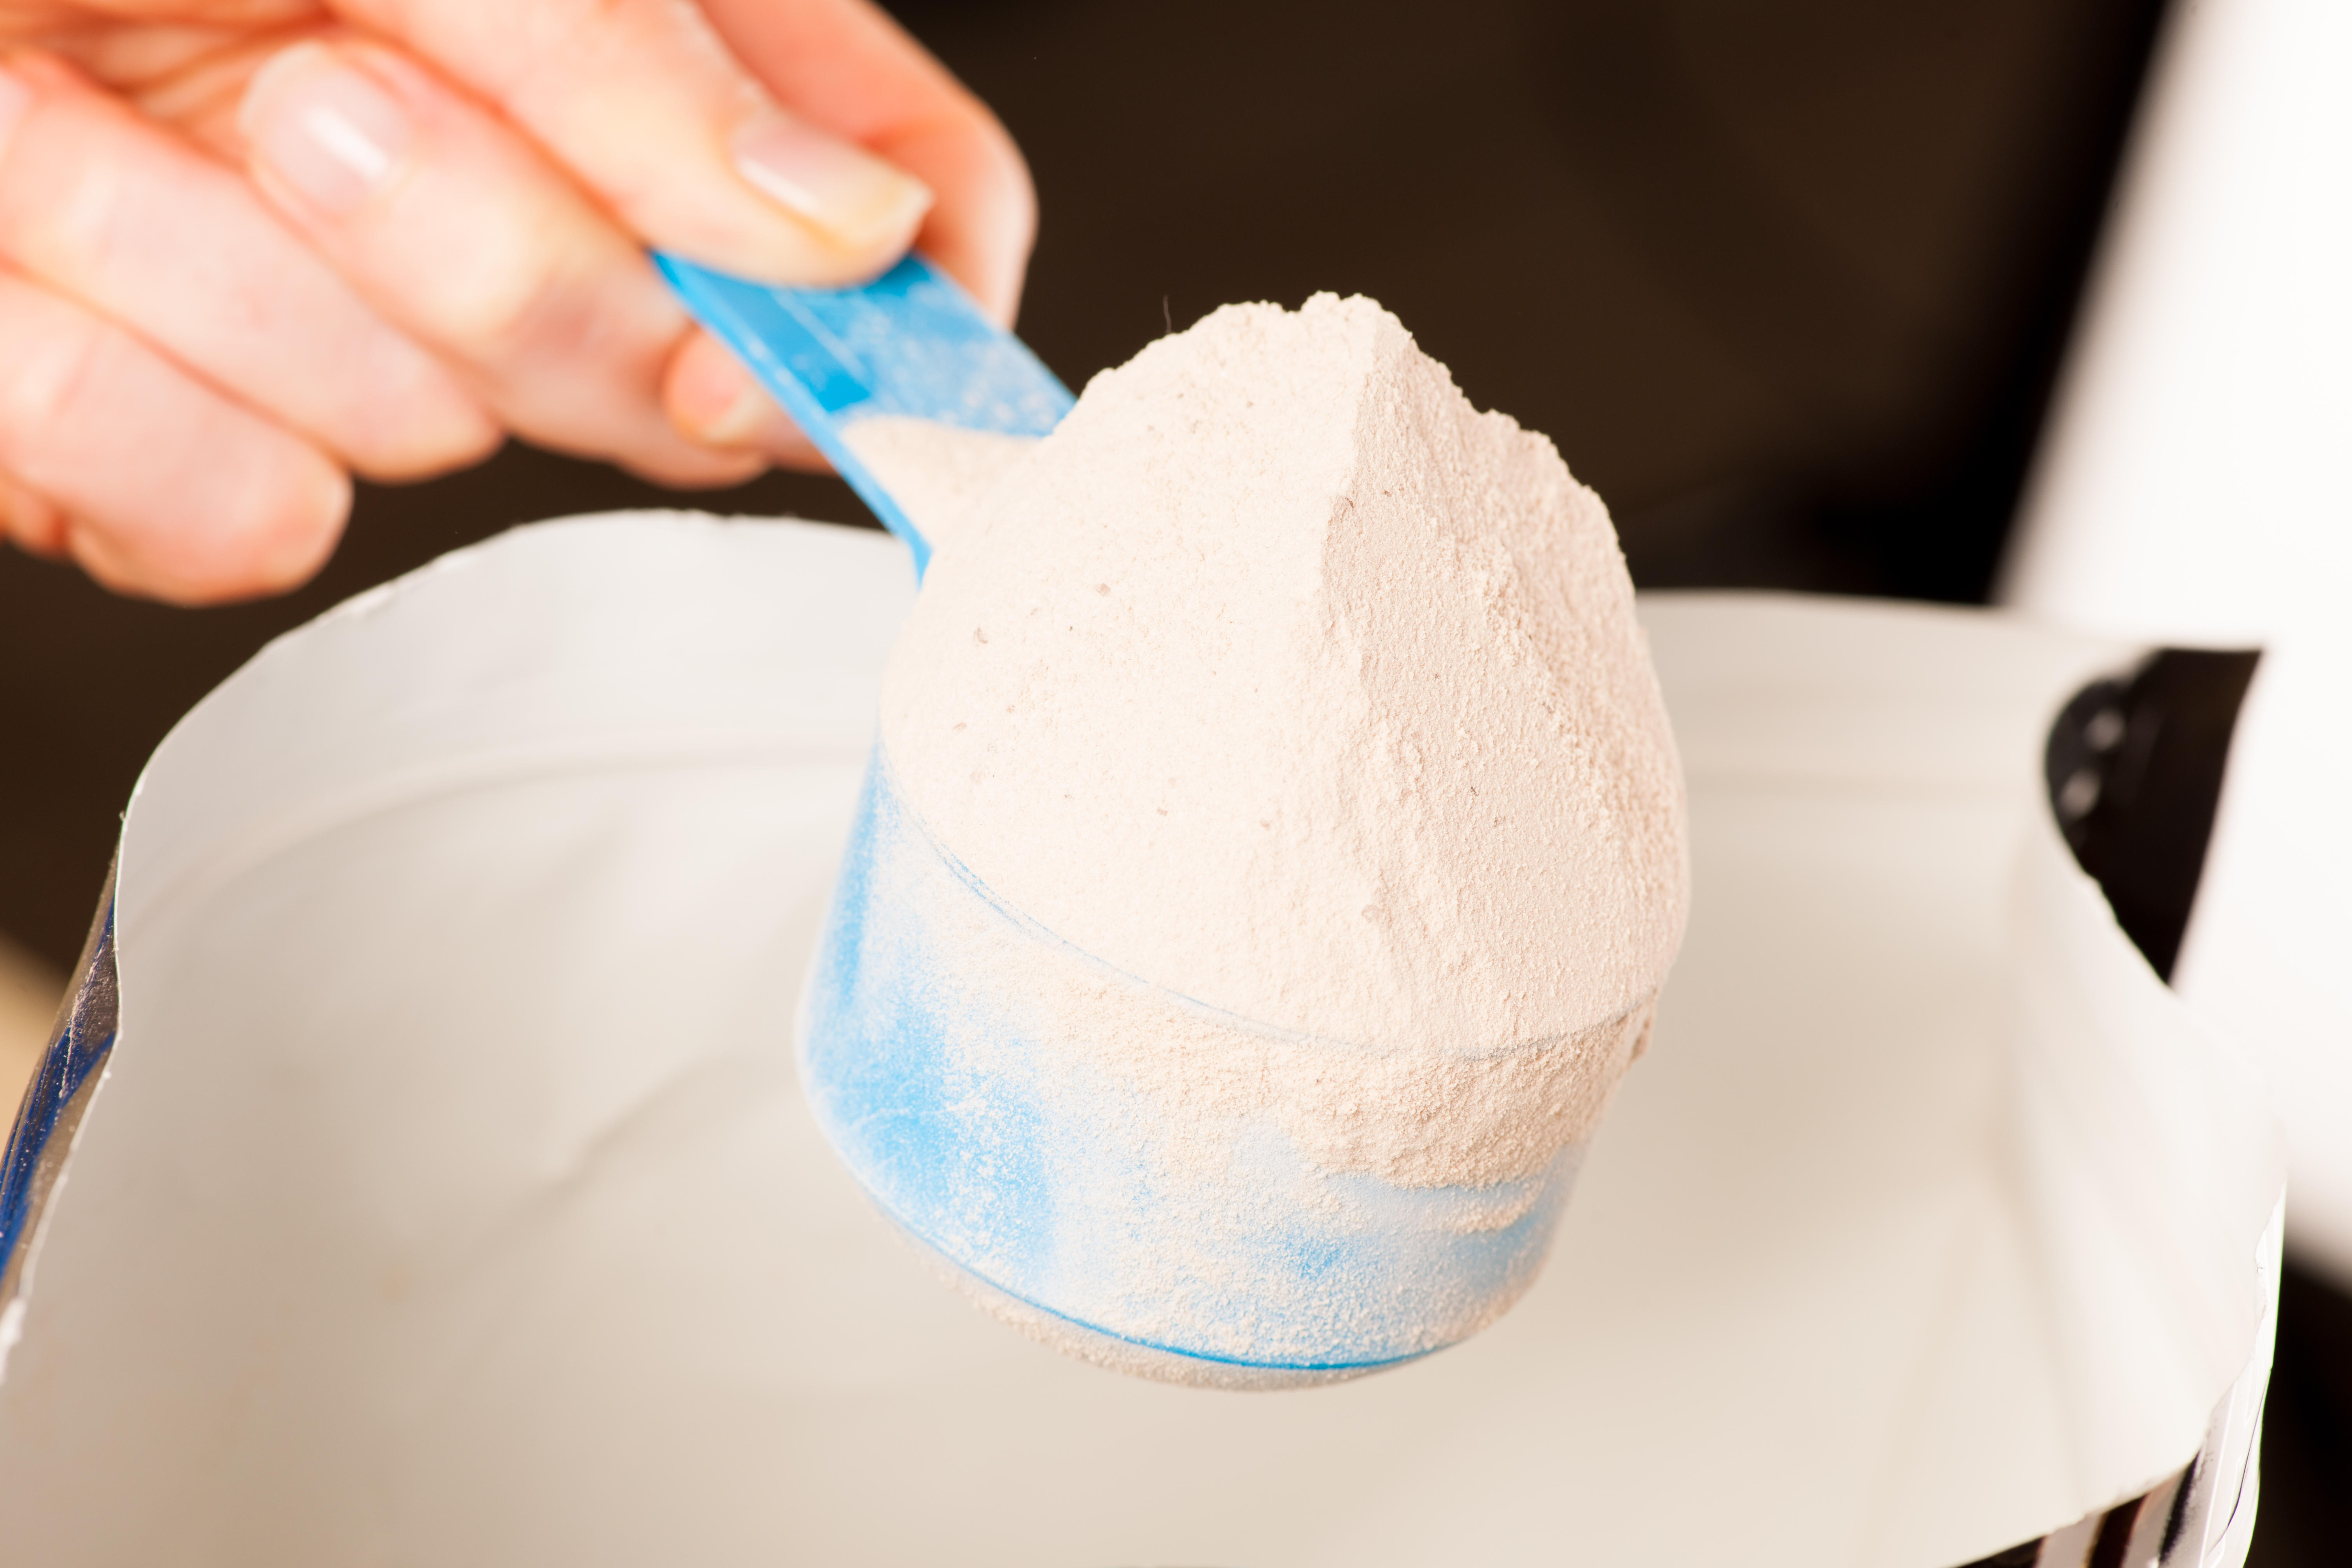 Heaped measuring scoop of whey protein powder